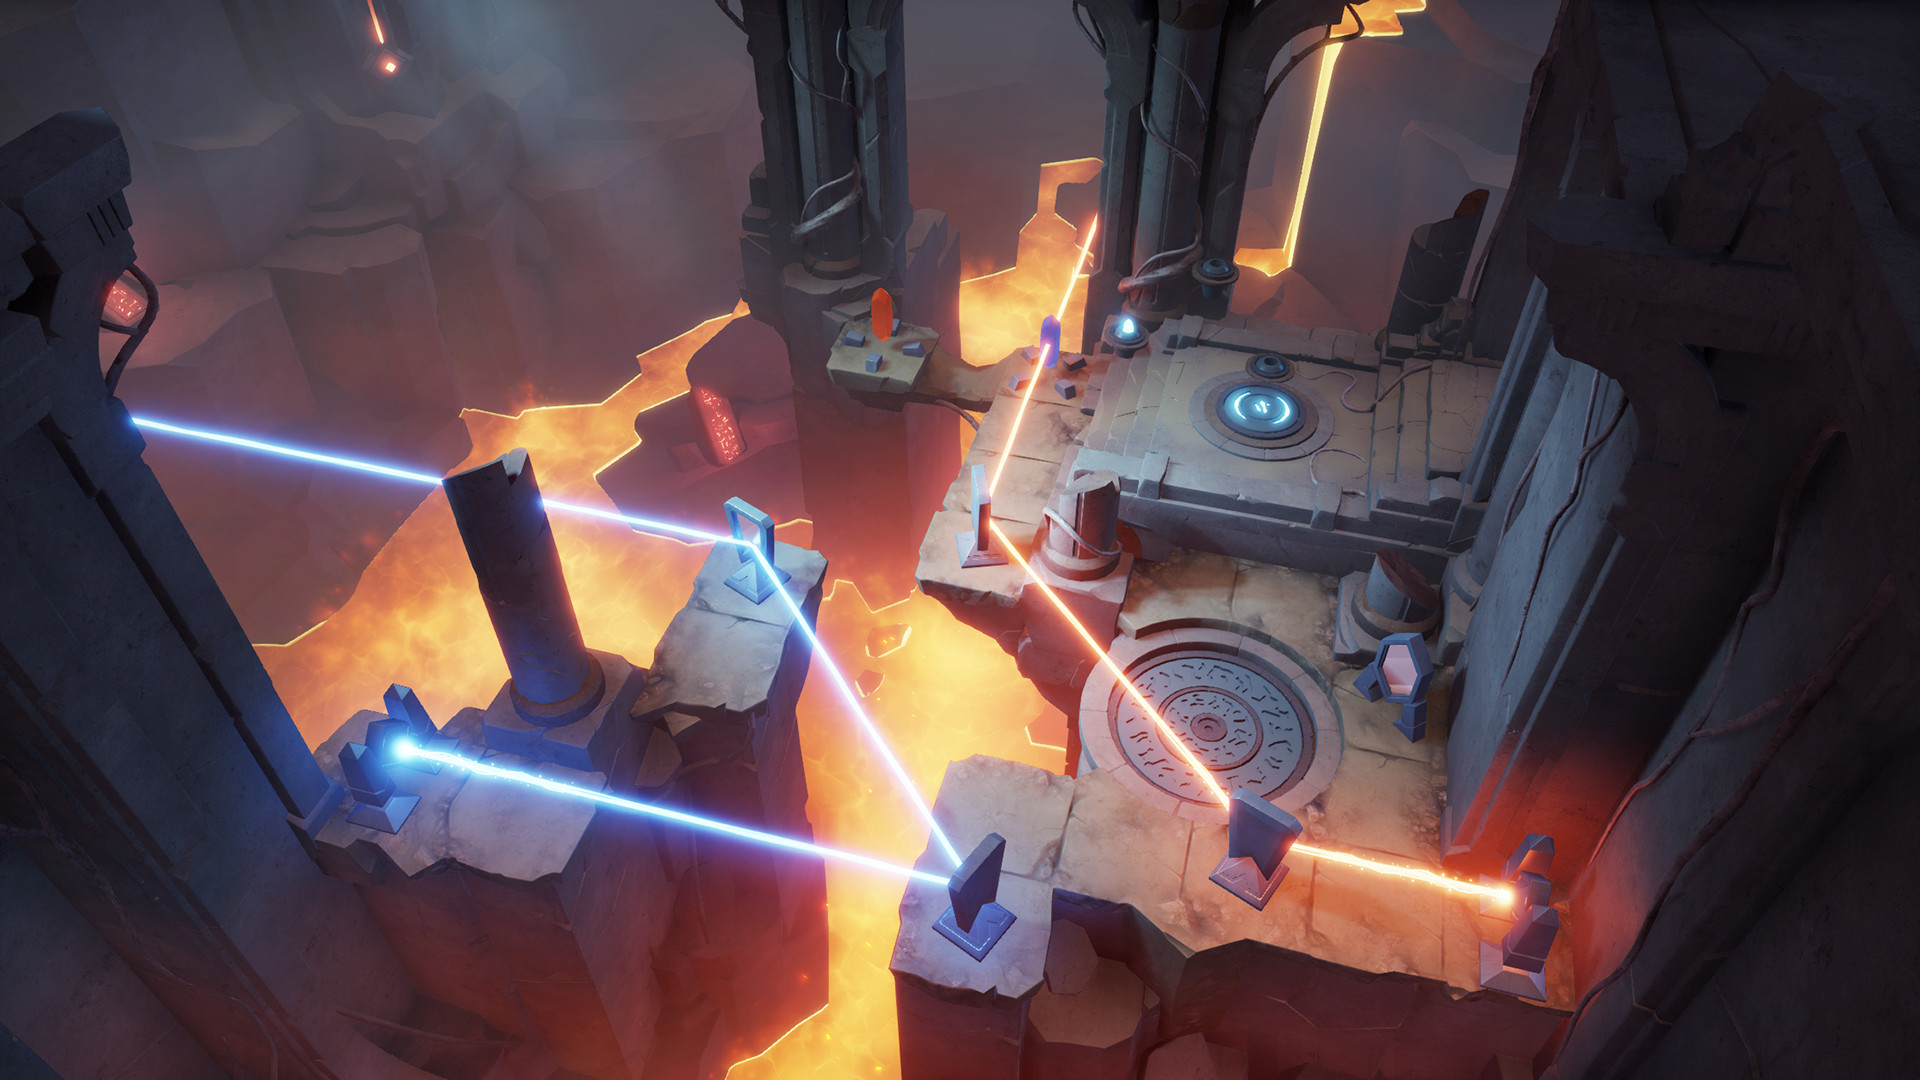 Archaica: The Path of Light on Steam